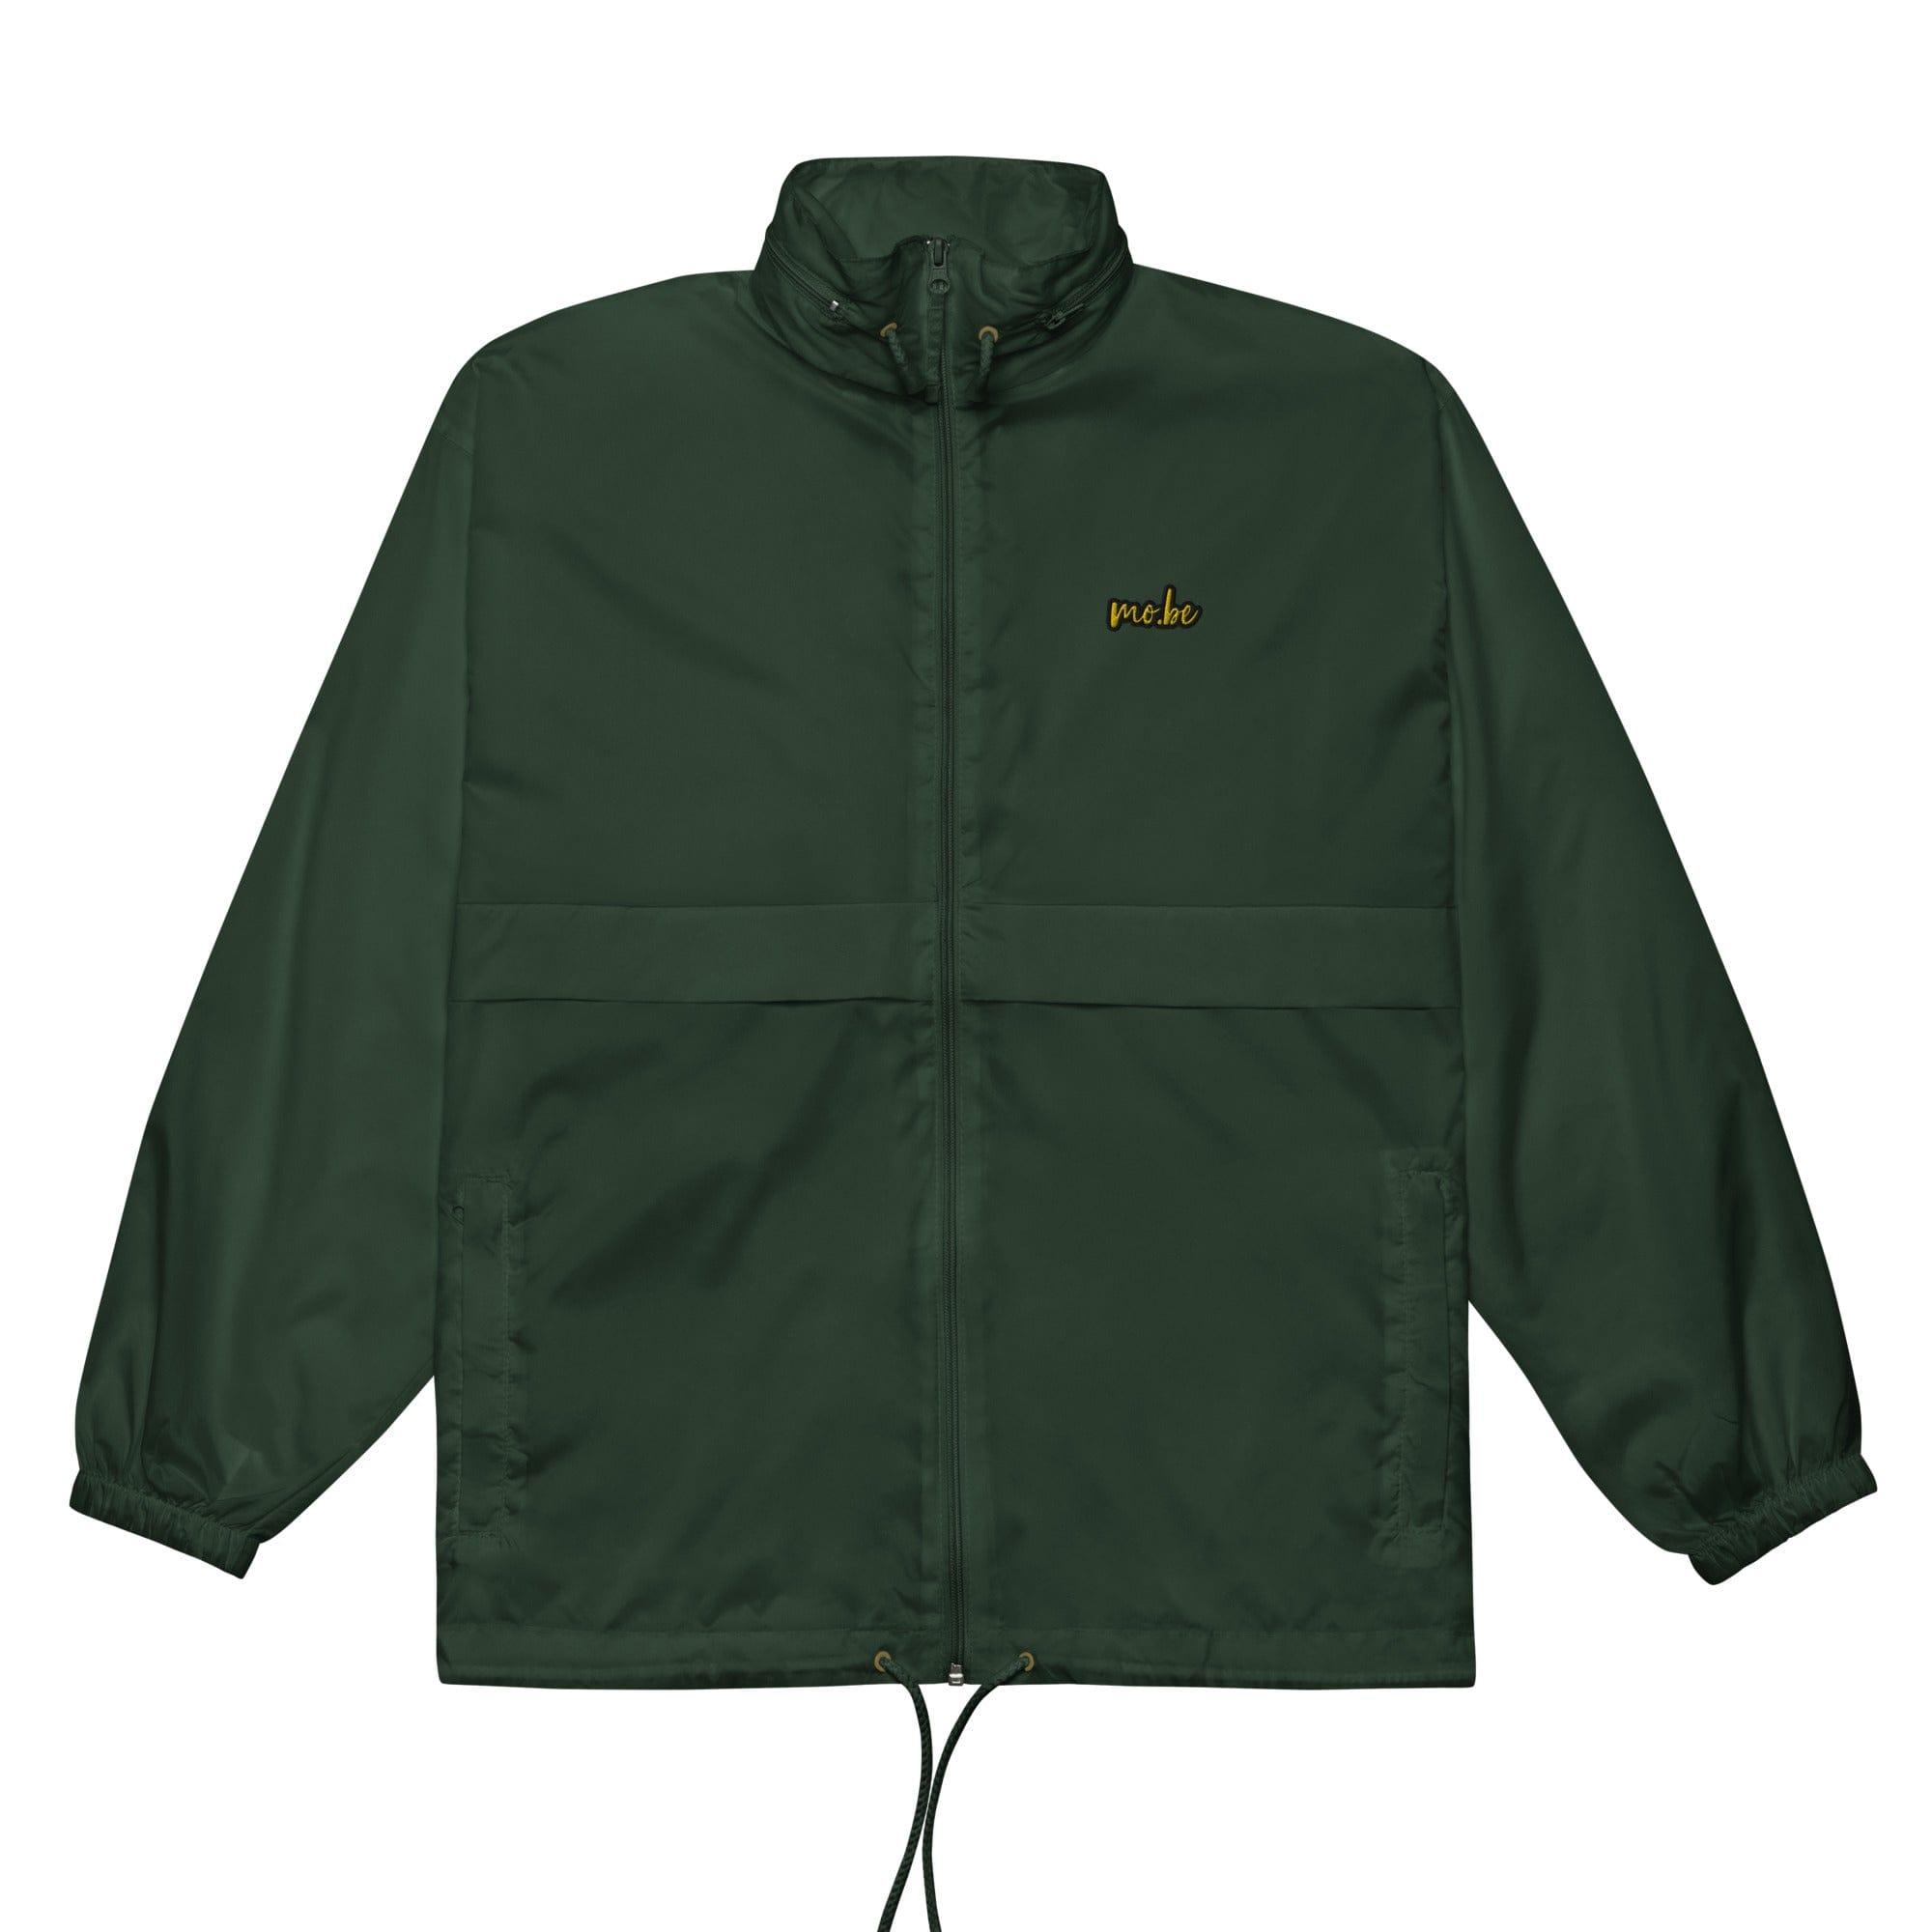 mo.be embroidered windbreaker - mo.be